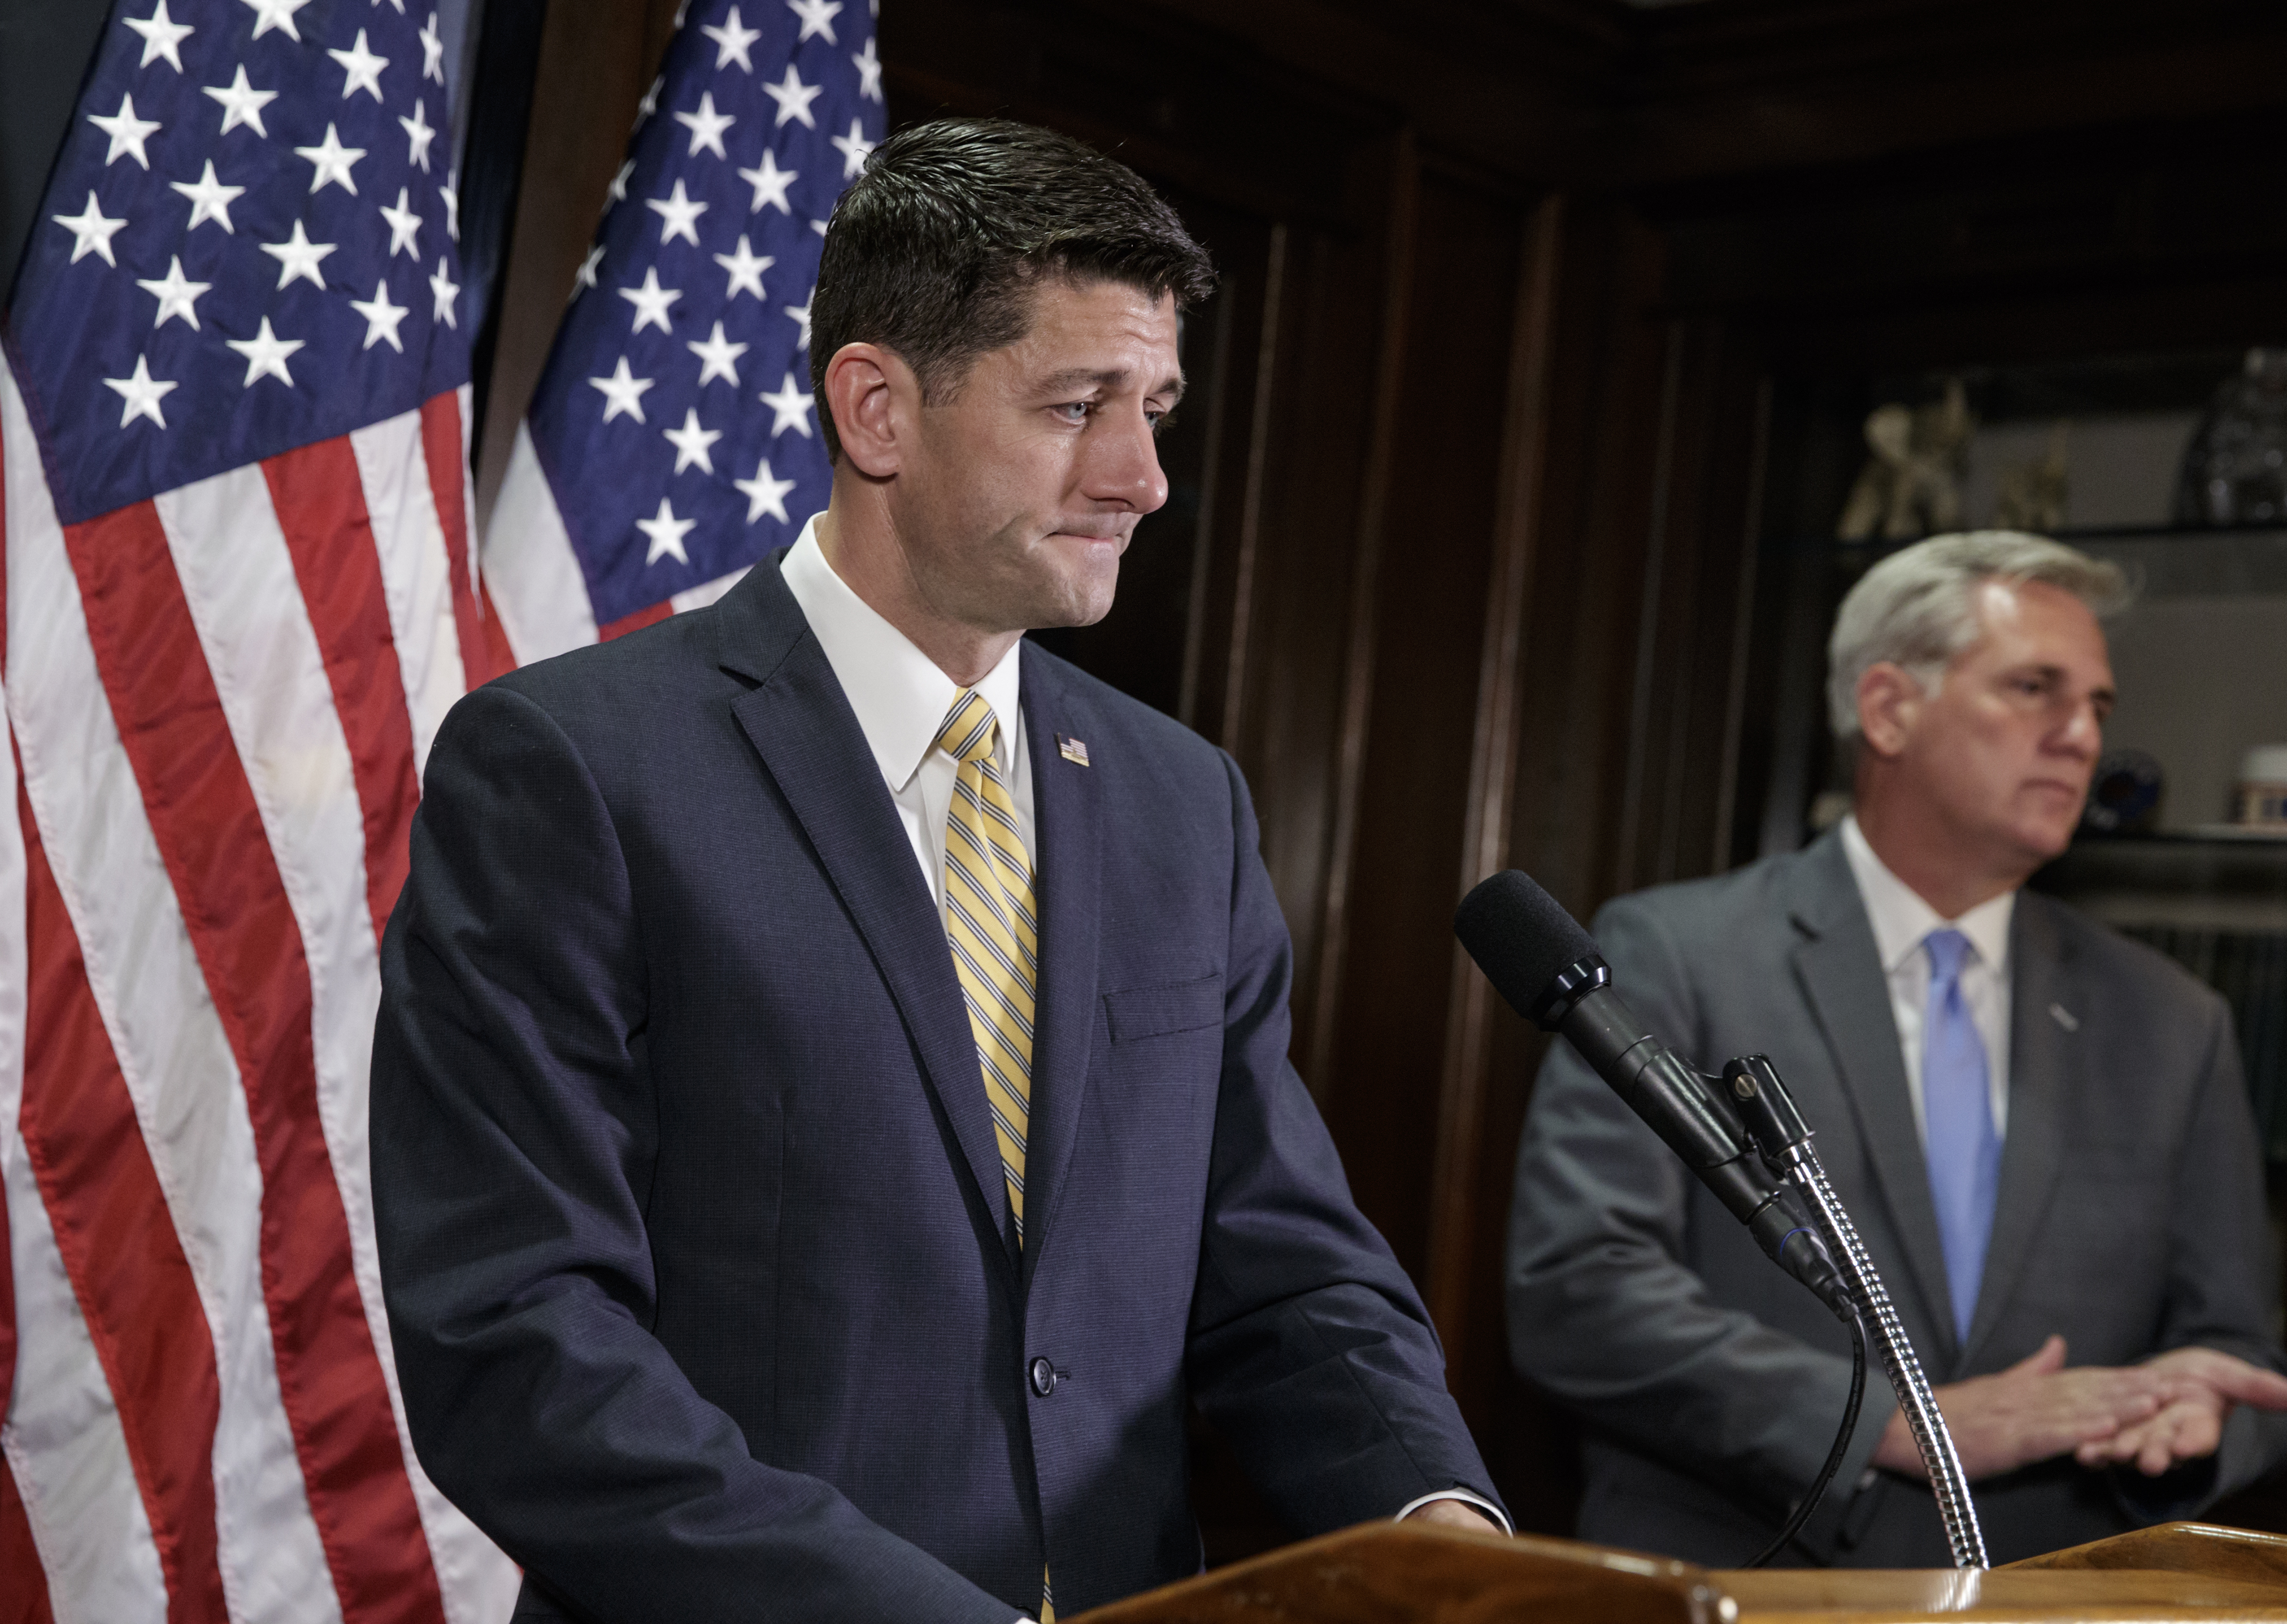 Paul Ryan and Kevin McCarthy speak about tax code